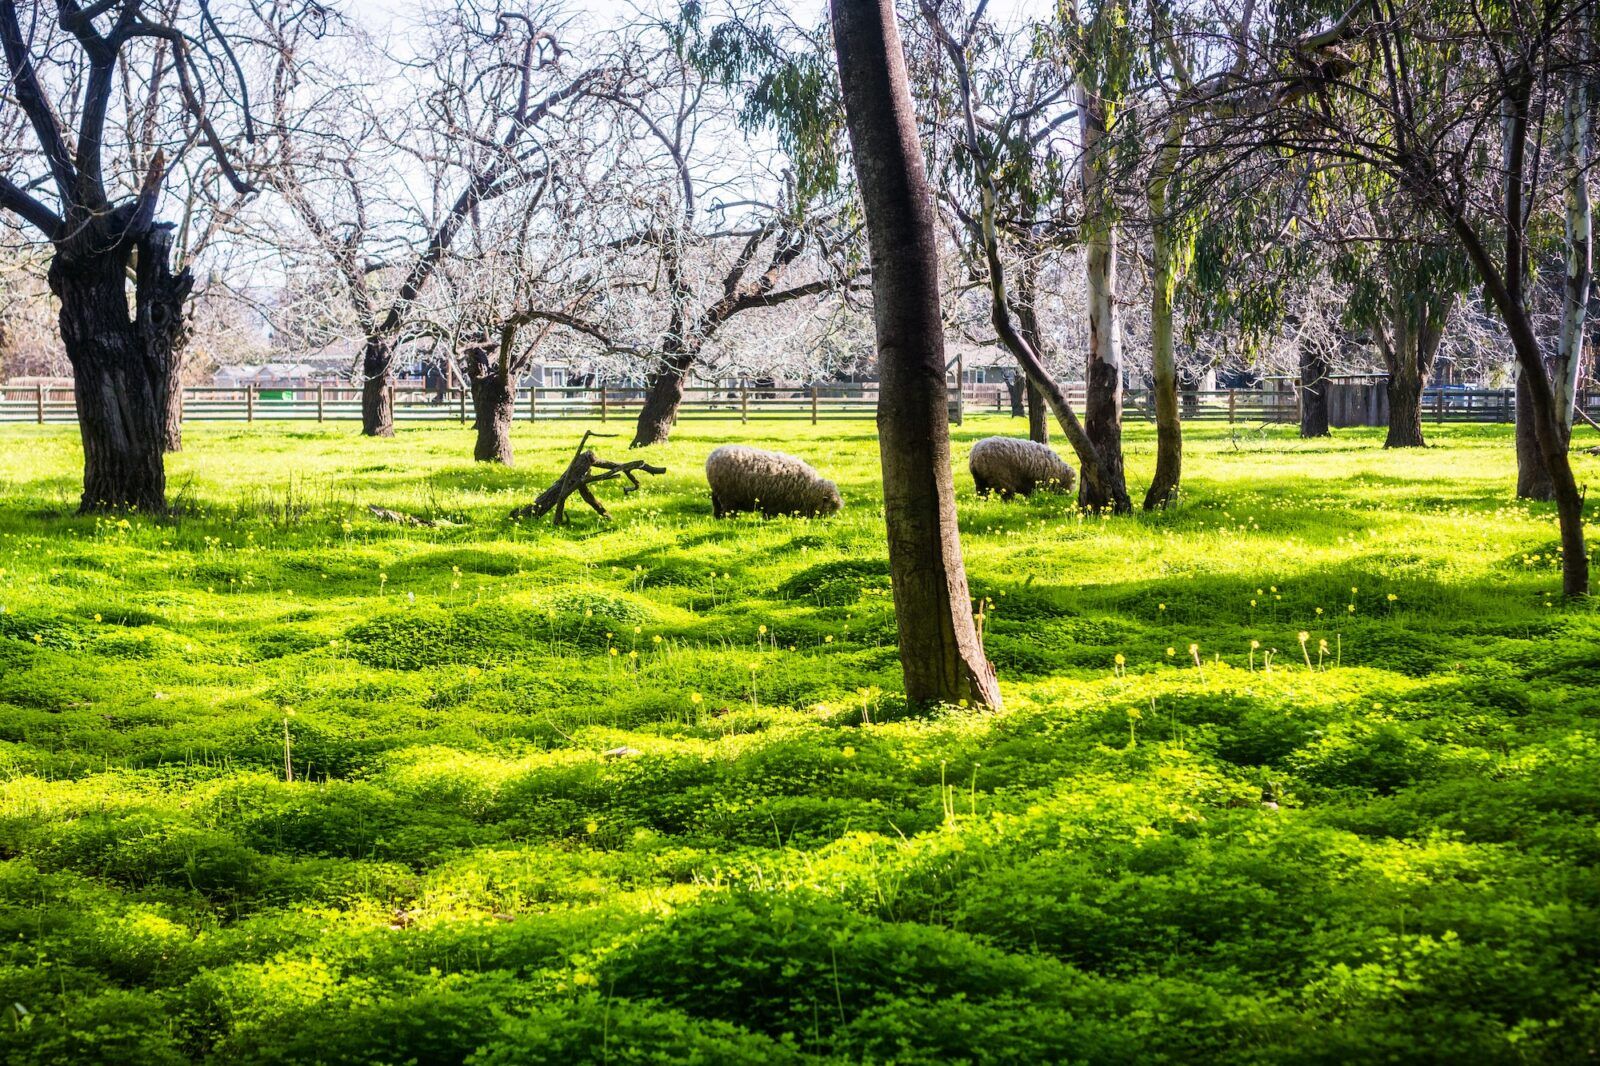 Sheep grazing on a green pasture